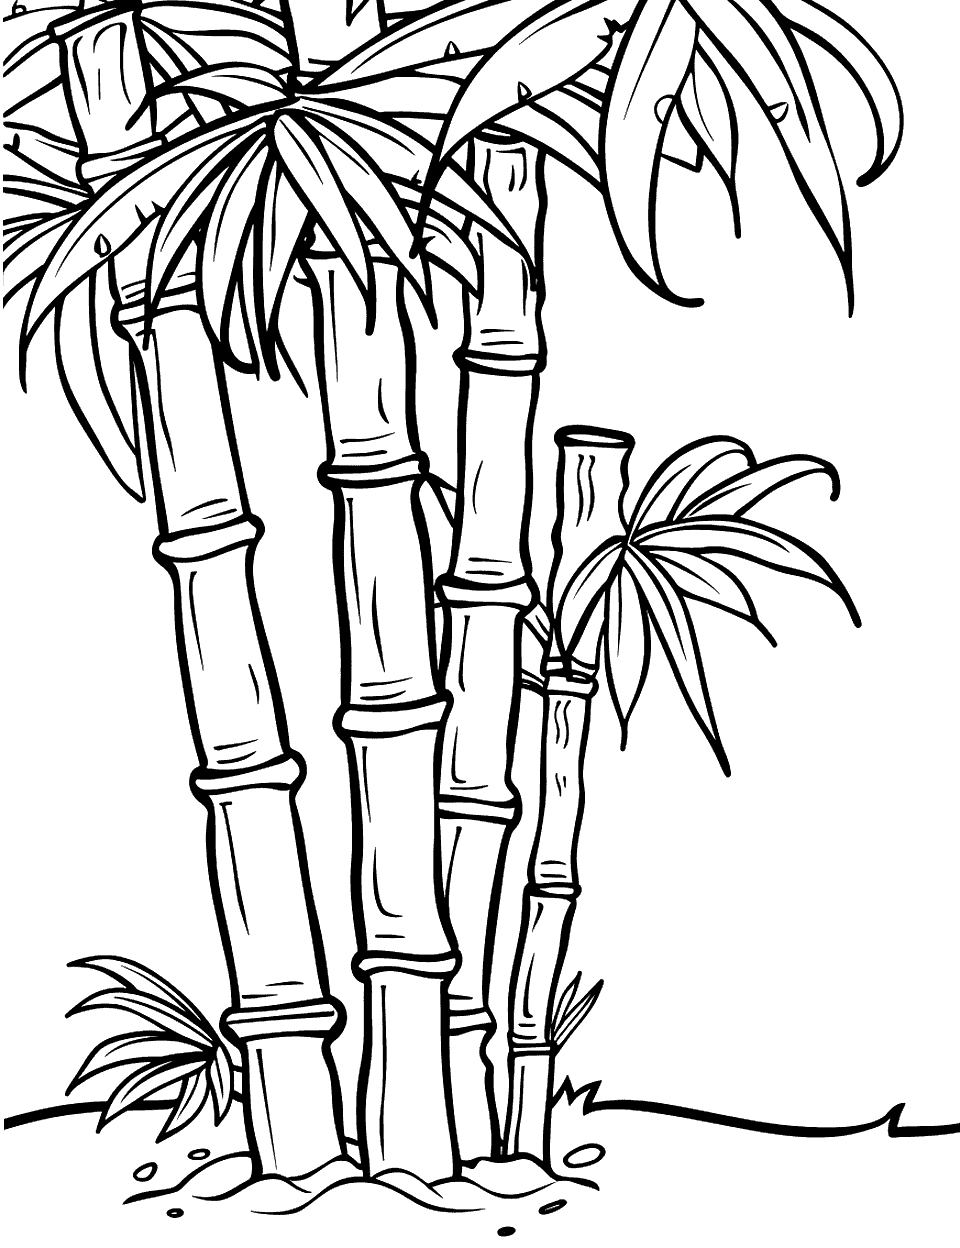 Bamboo Grove Coloring Page - A cluster of bamboo stalks, representing tranquility and strength.